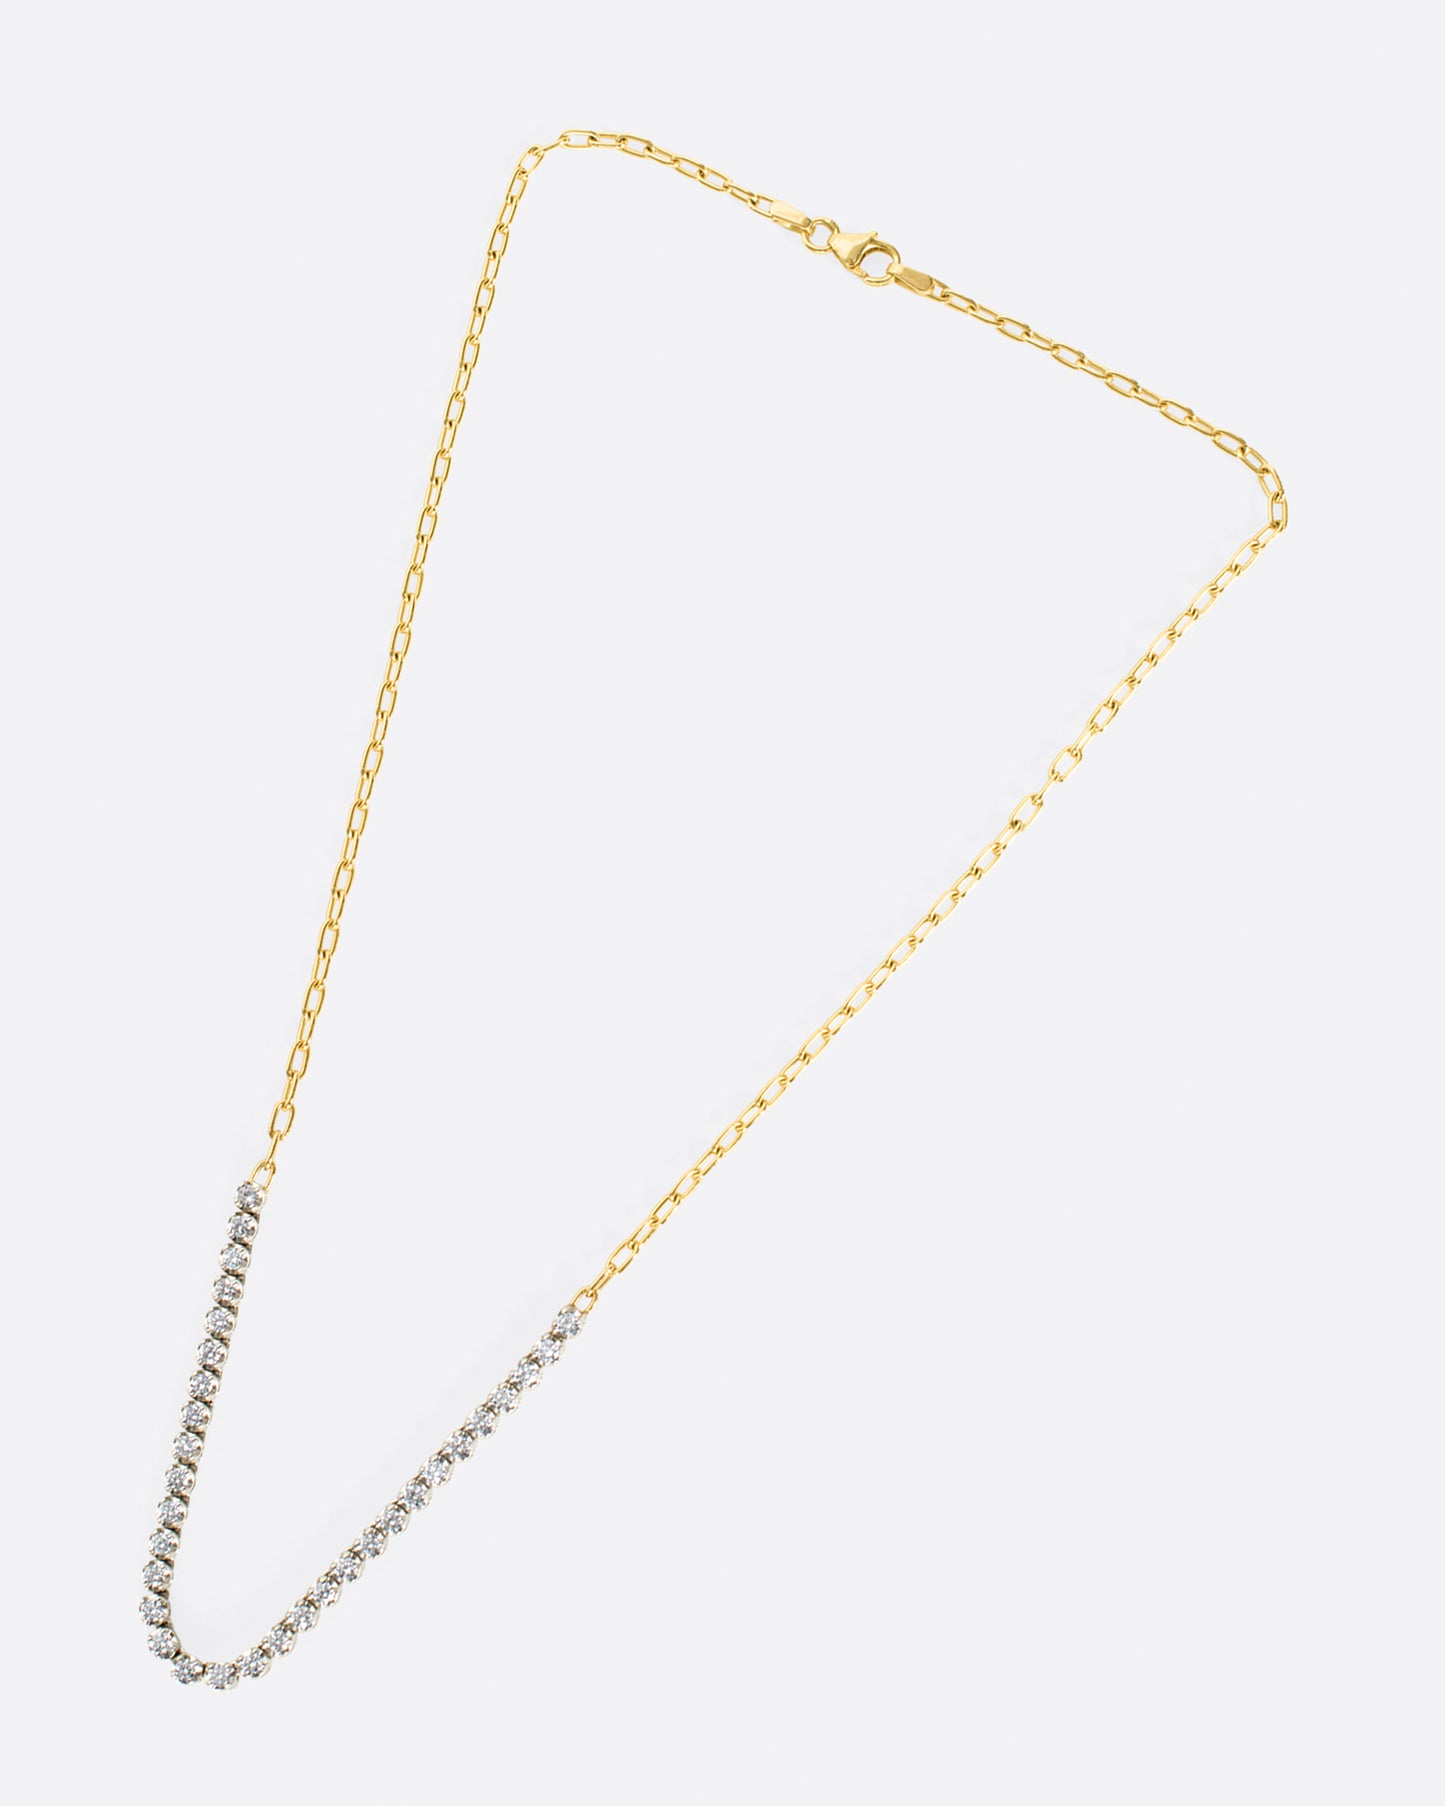 A yellow gold, oval link, chain necklace with four inches of contrasting white diamonds.